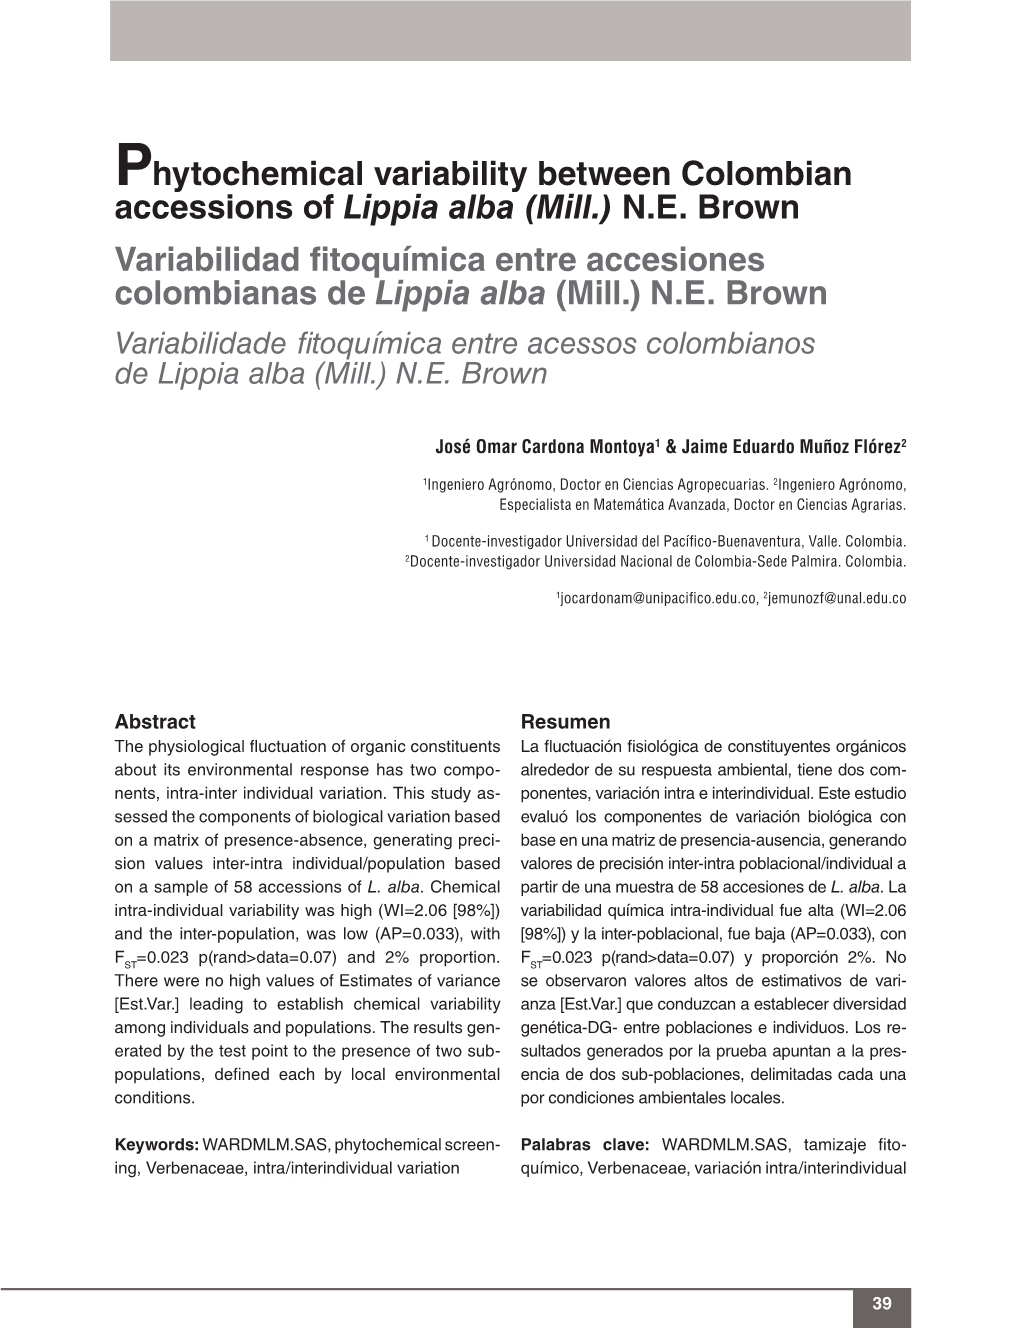 Phytochemical Variability Between Colombian Accessions of Lippia Alba (Mill.) N.E. Brown Variabilidad Fitoquímica Entre Accesio